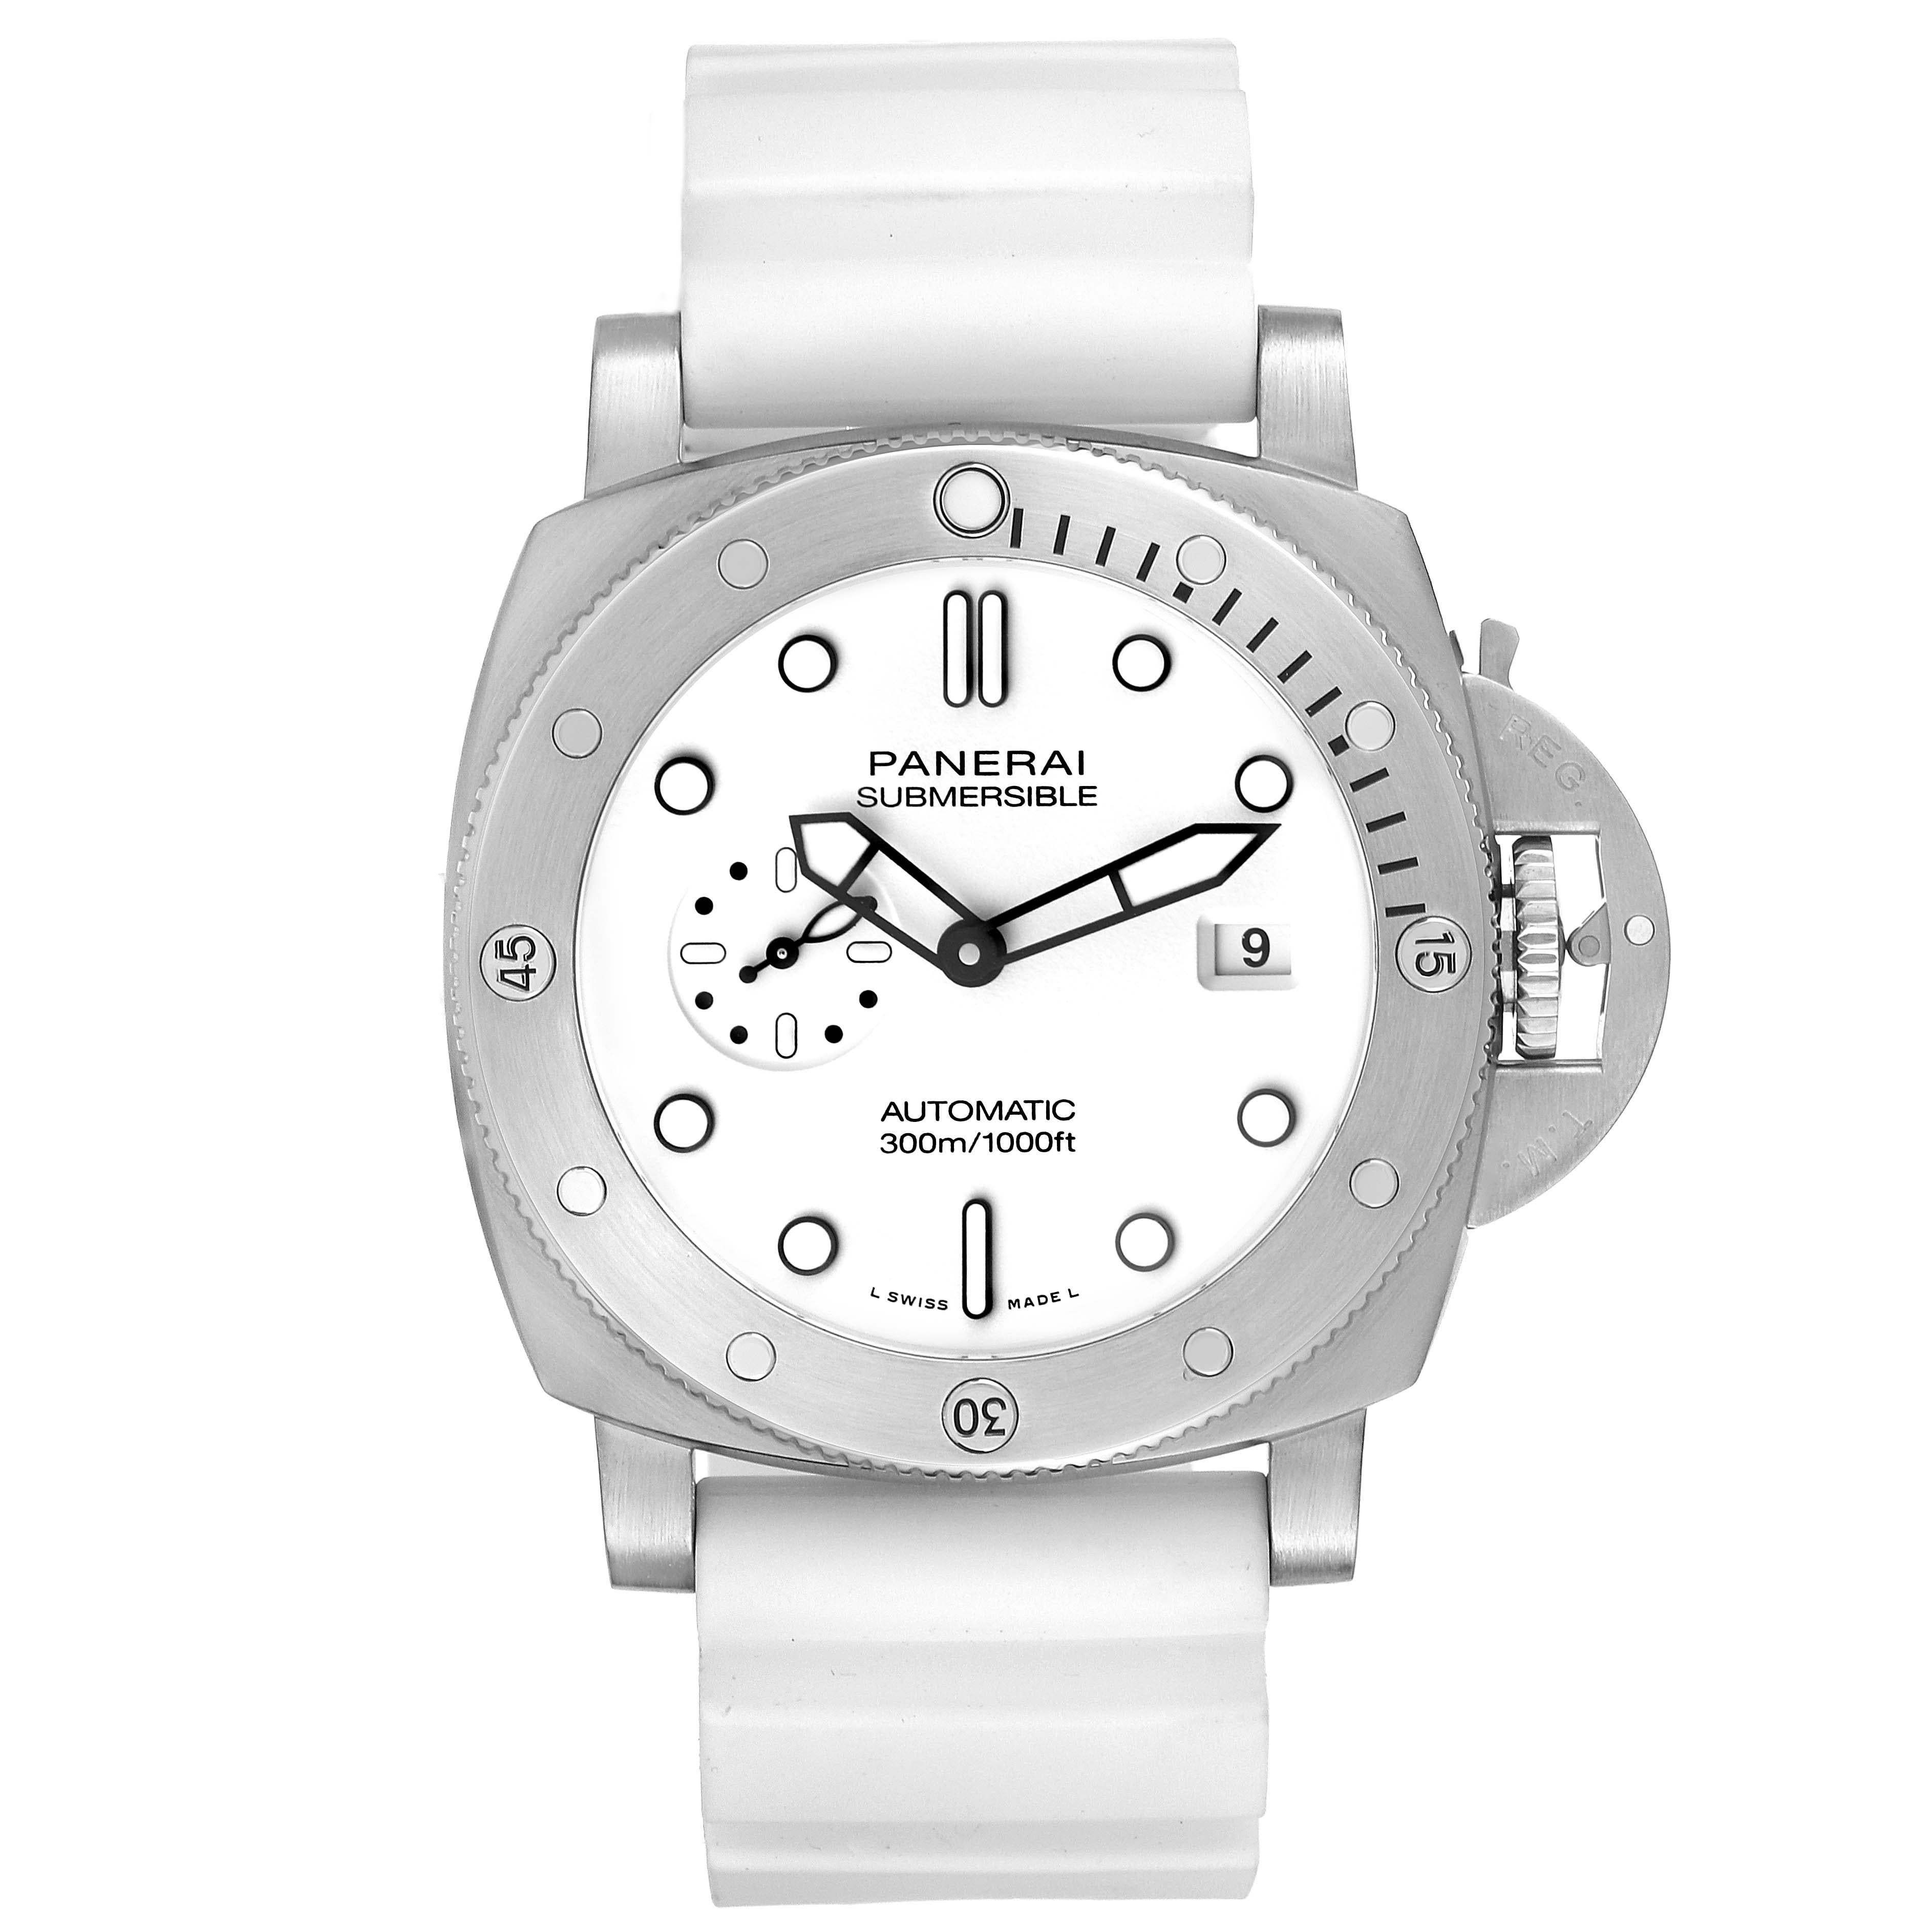 Panerai Submersible QuarantaQuattro Bianco Steel Mens Watch PAM01226 Box Card. Automatic self-winding movement. Stainless steel cushion case, 44.0 mm in diameter. Panerai patented crown protector. Unidirectional rotating stainless steel diver's